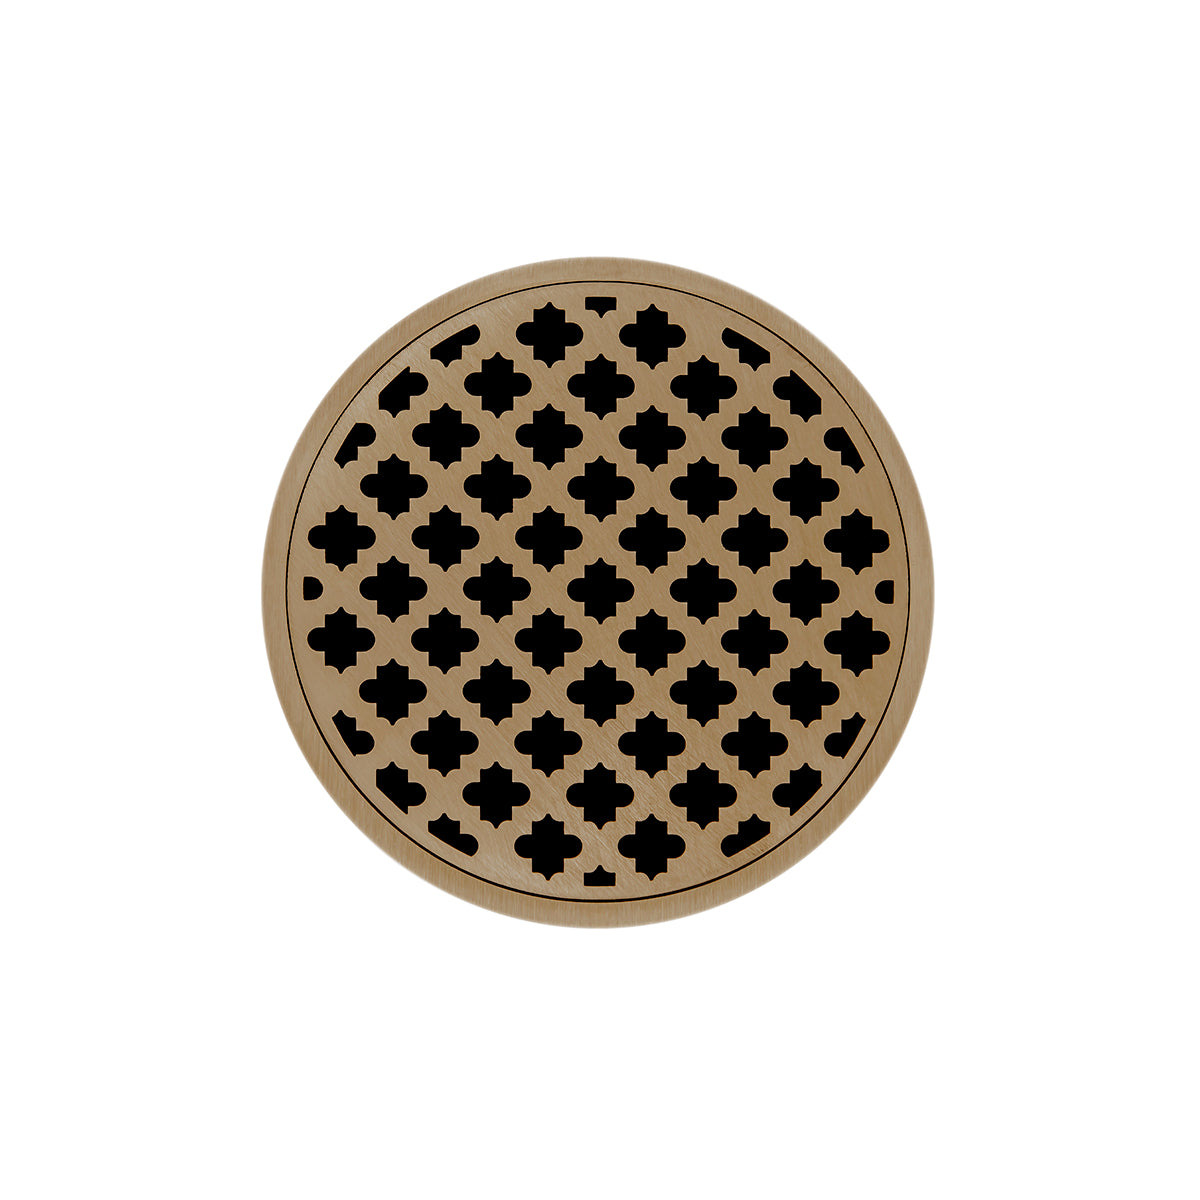 Infinity Drain 5" Round RMD 5 High Flow Premium Center Drain Kit with Moor Pattern Decorative Plate with ABS Drain Body, 3" Outlet